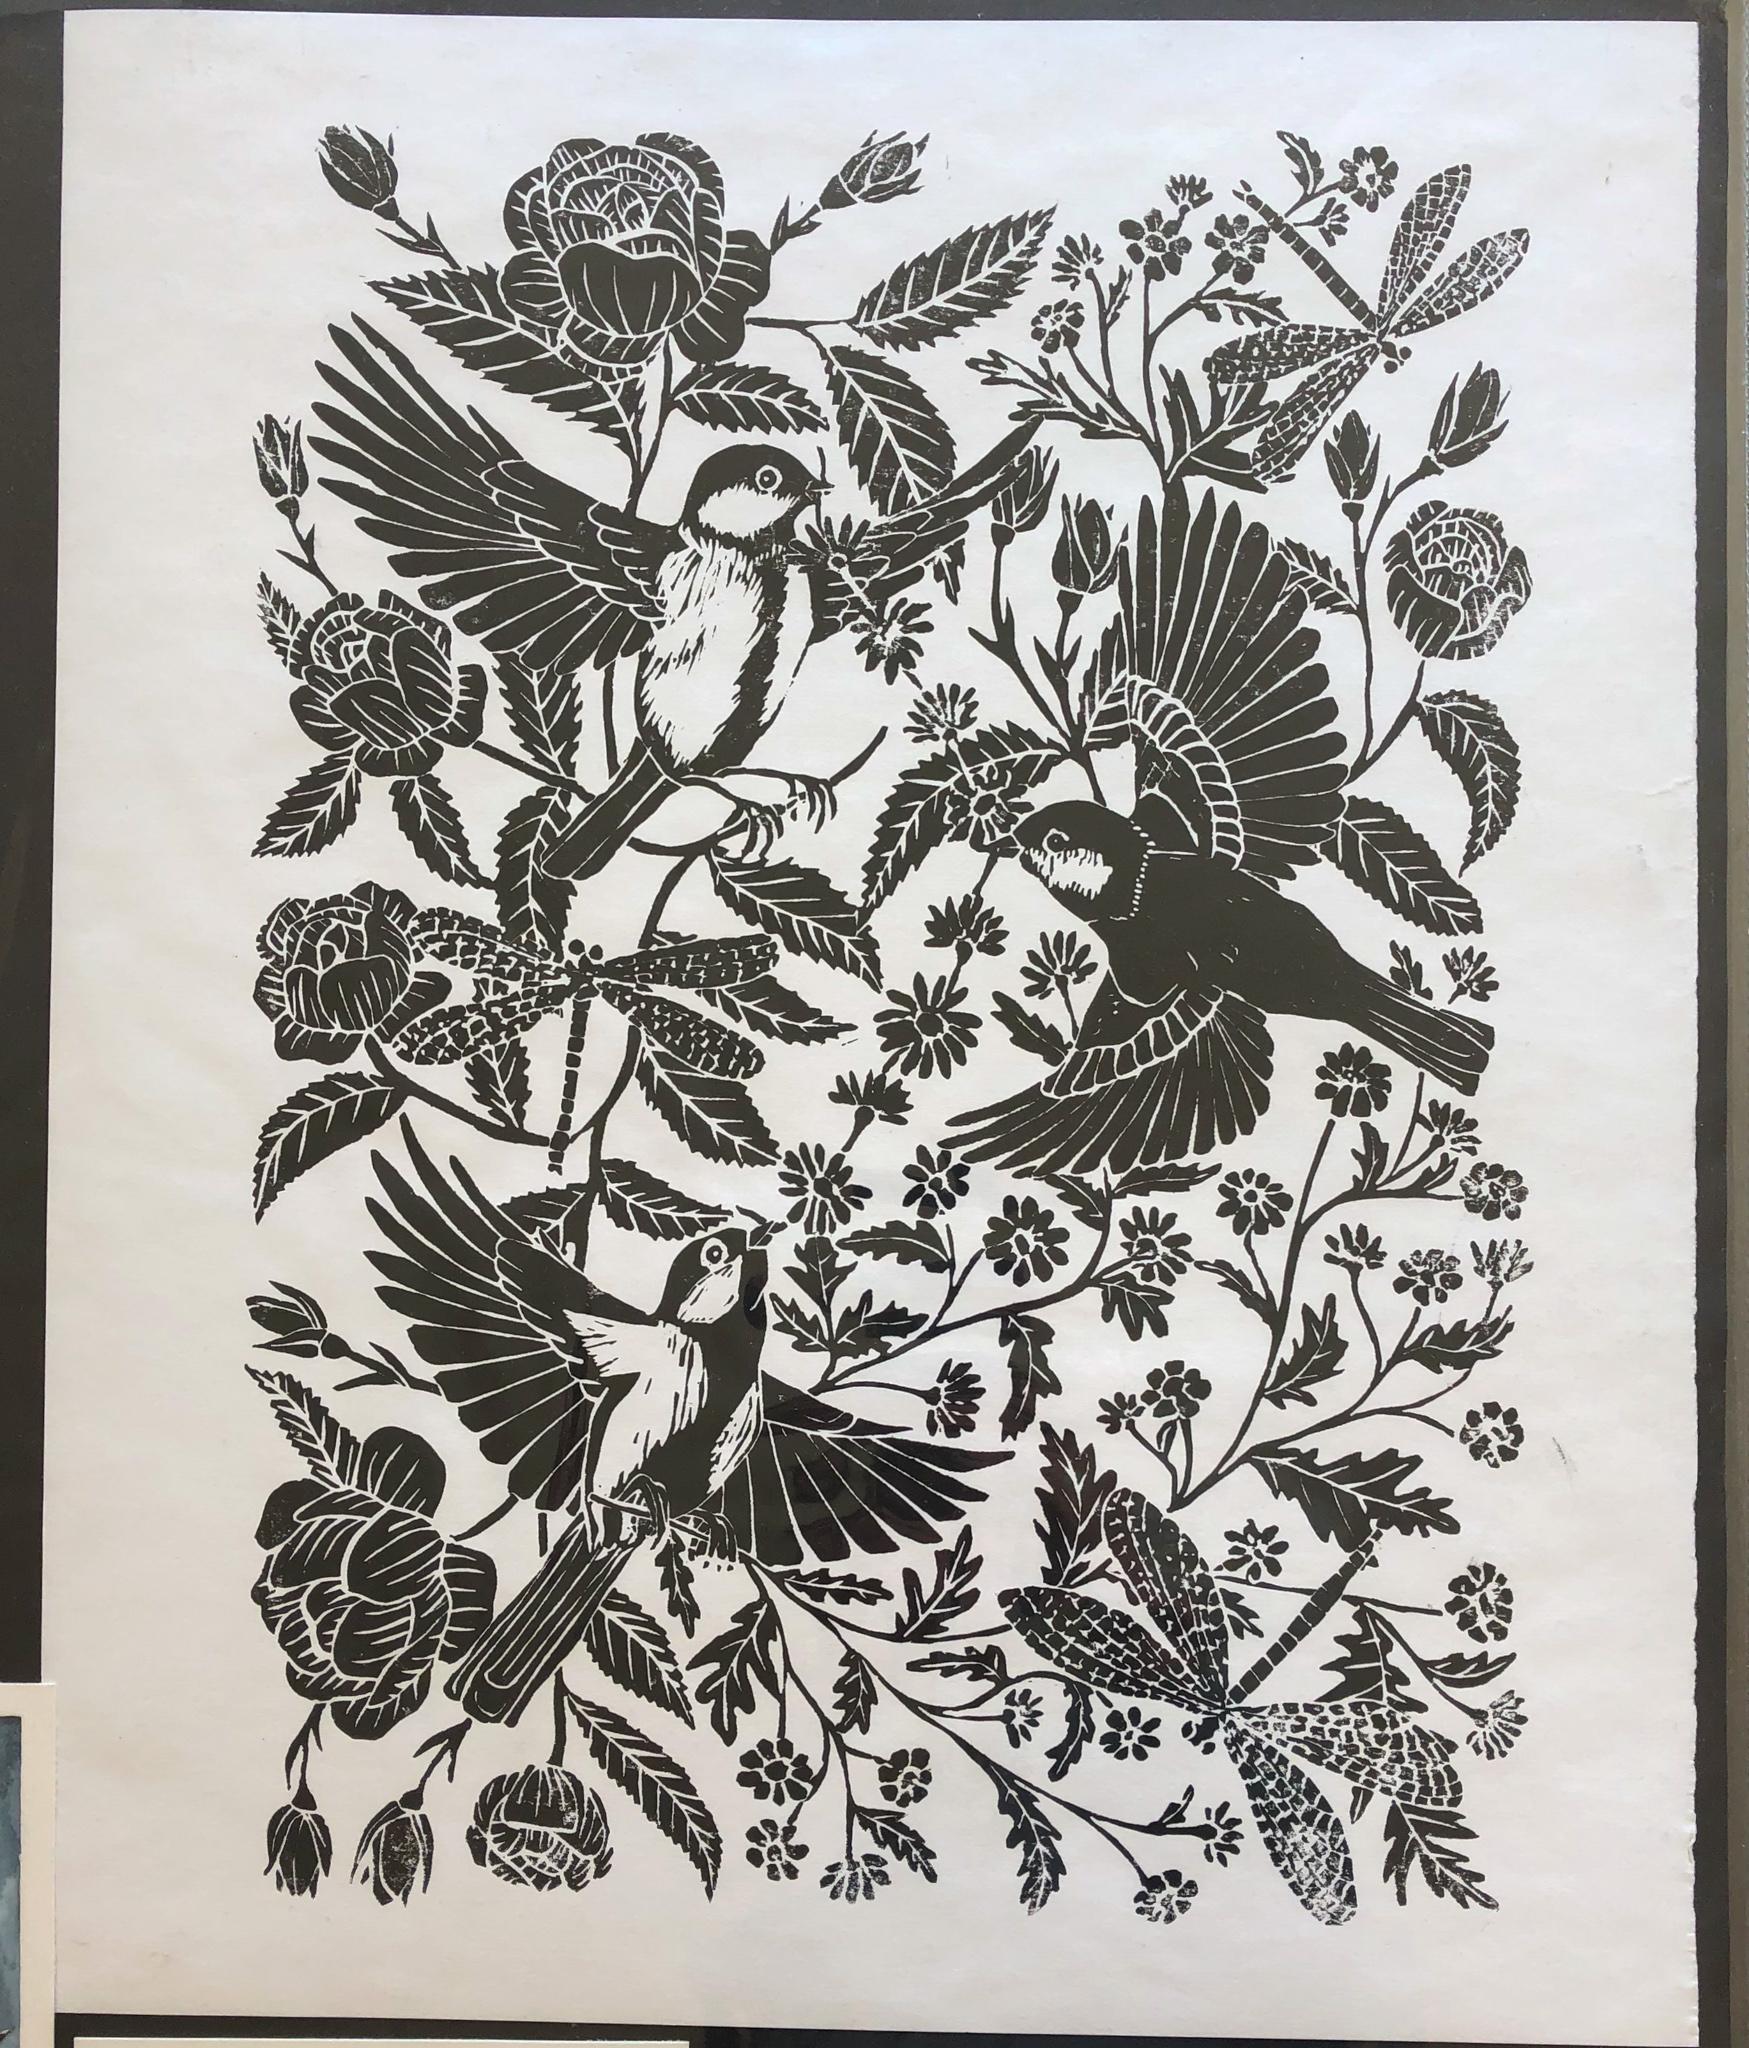 Jenny Evans
Daisy Chain in Black
Linocut
Sold Unframed
Image Size: H 41cm x W 28cm
(Please note that in situ images are purely an indication of how a piece may look).

This original print is a one-of-a-kind piece, a maximum of 5 originals, all